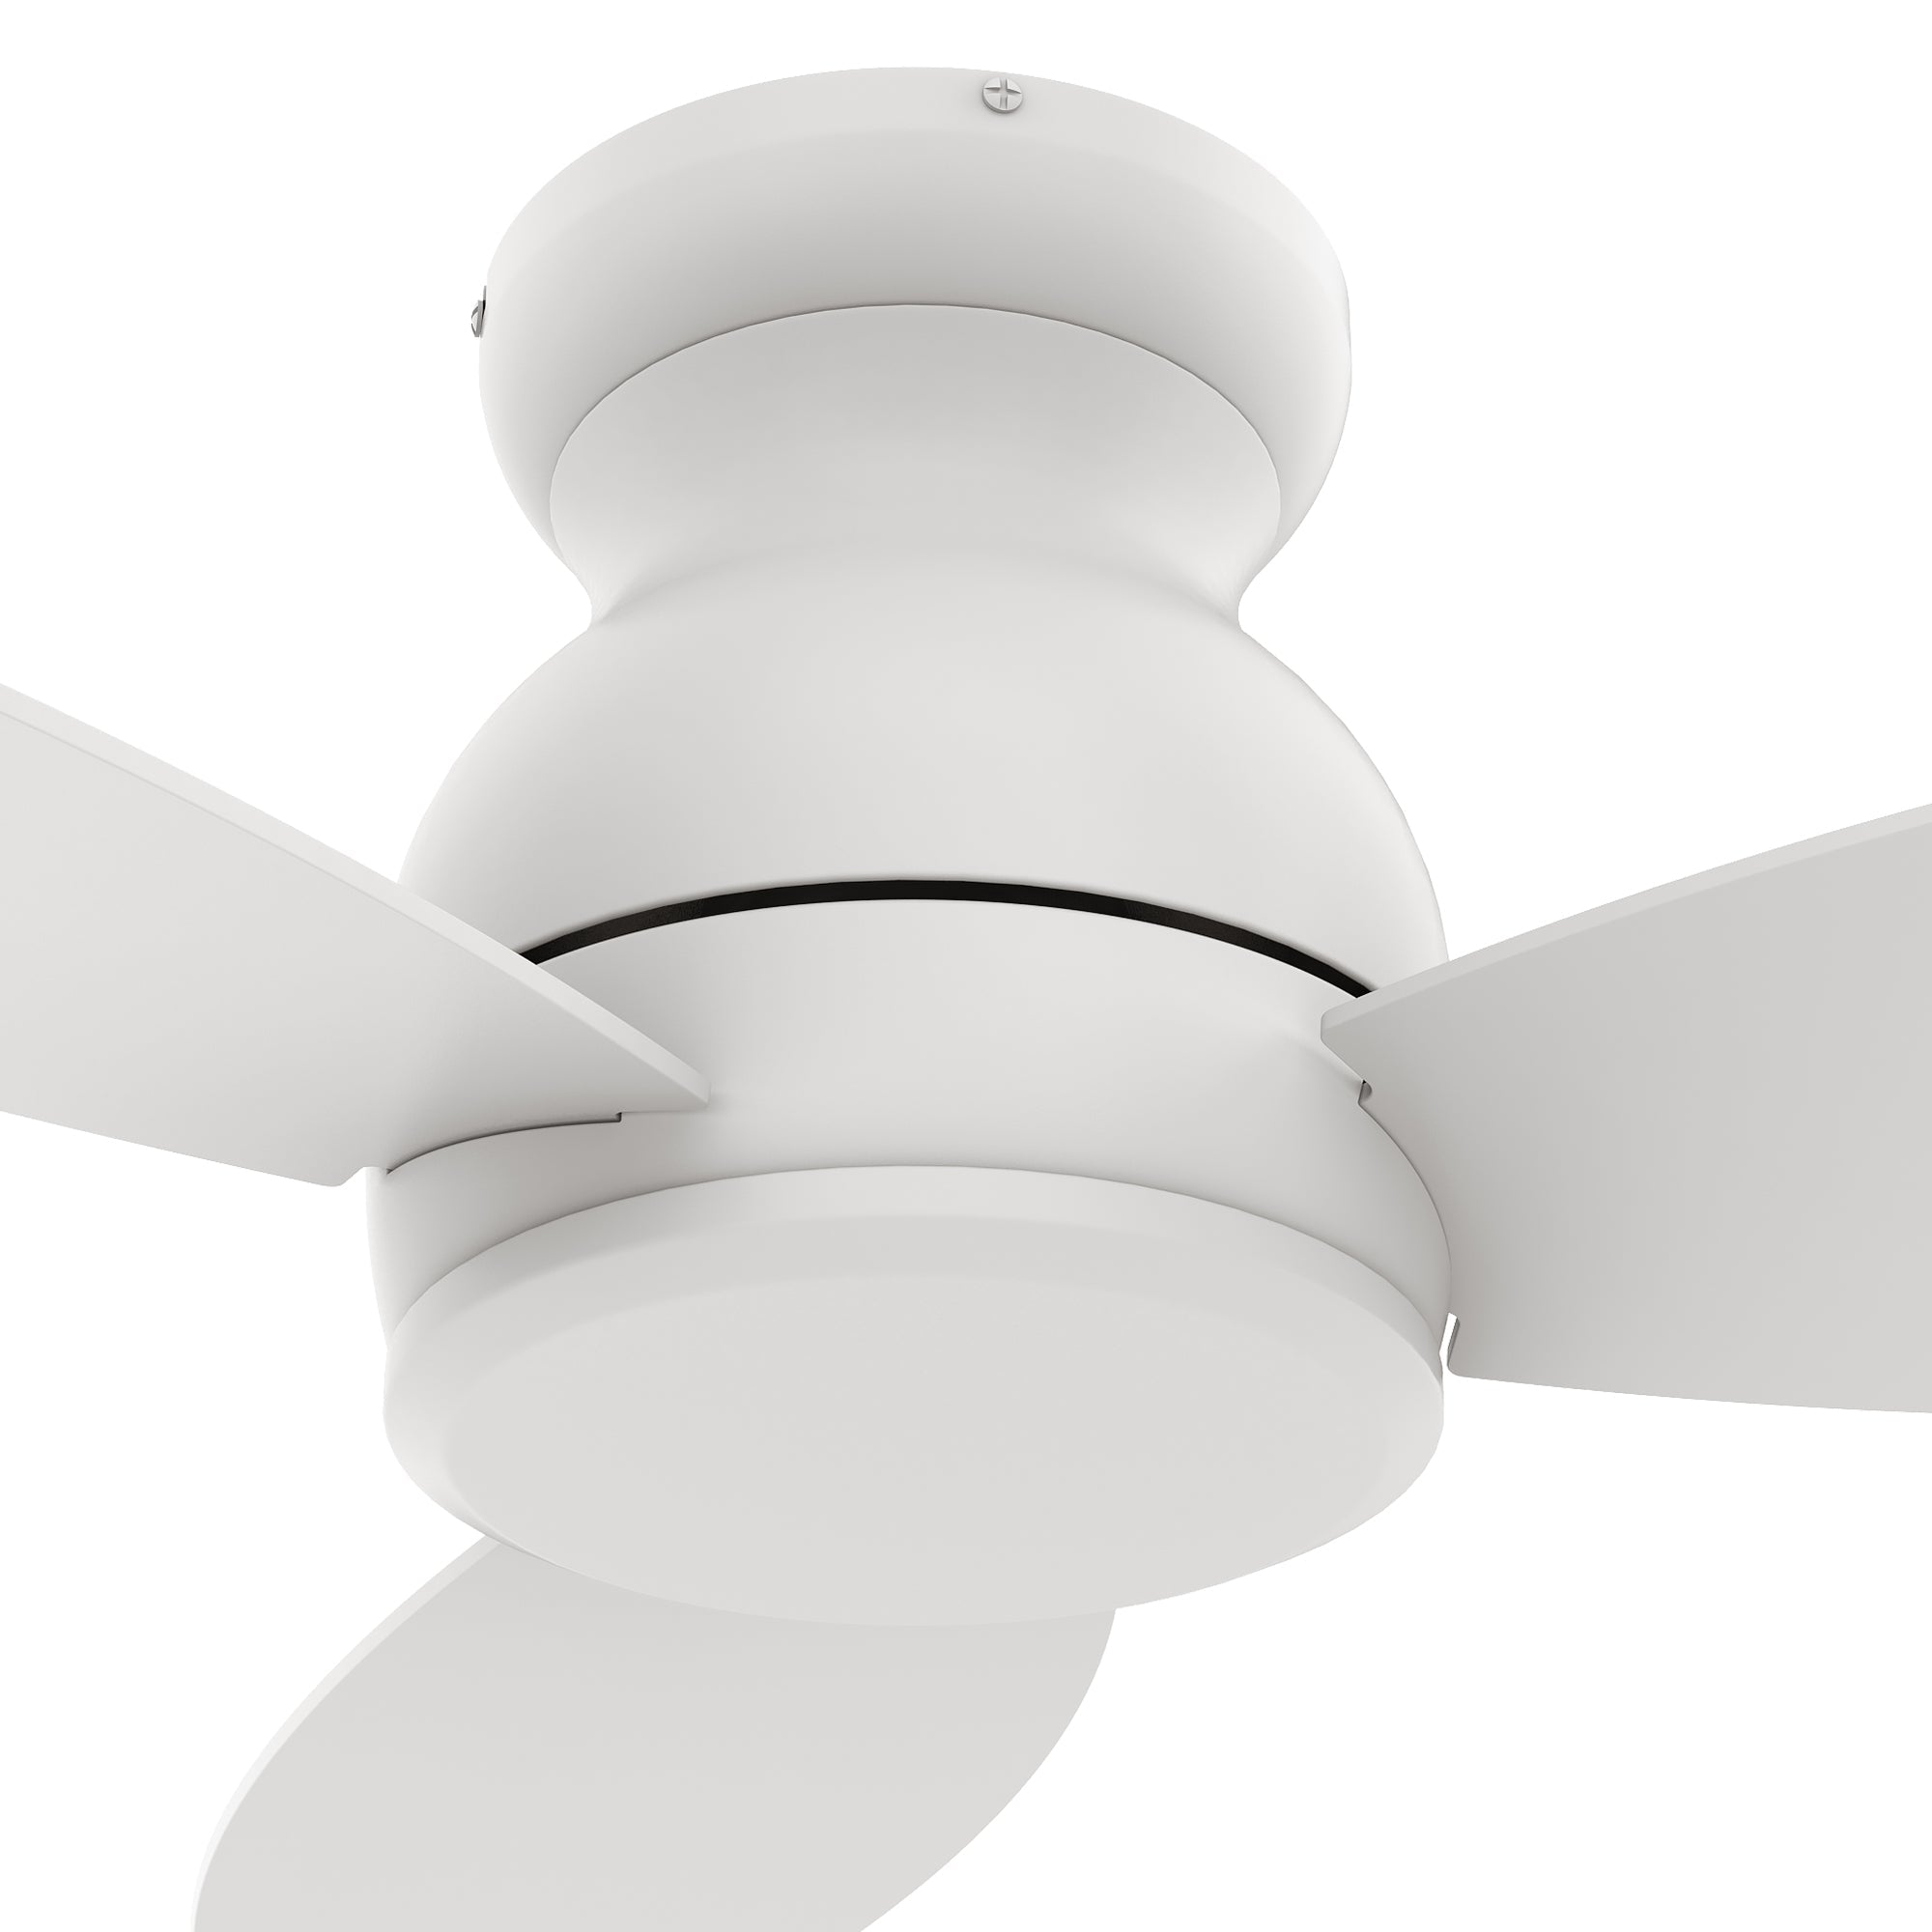 This Osborn48&#39;&#39;ceiling fan keeps your space cool and stylish. It is a soft modern masterpiece perfect for your indoor living spaces. This ceiling fan is a simplicity designing with White finish, use elegant Plywood blades. The fan features remote control.